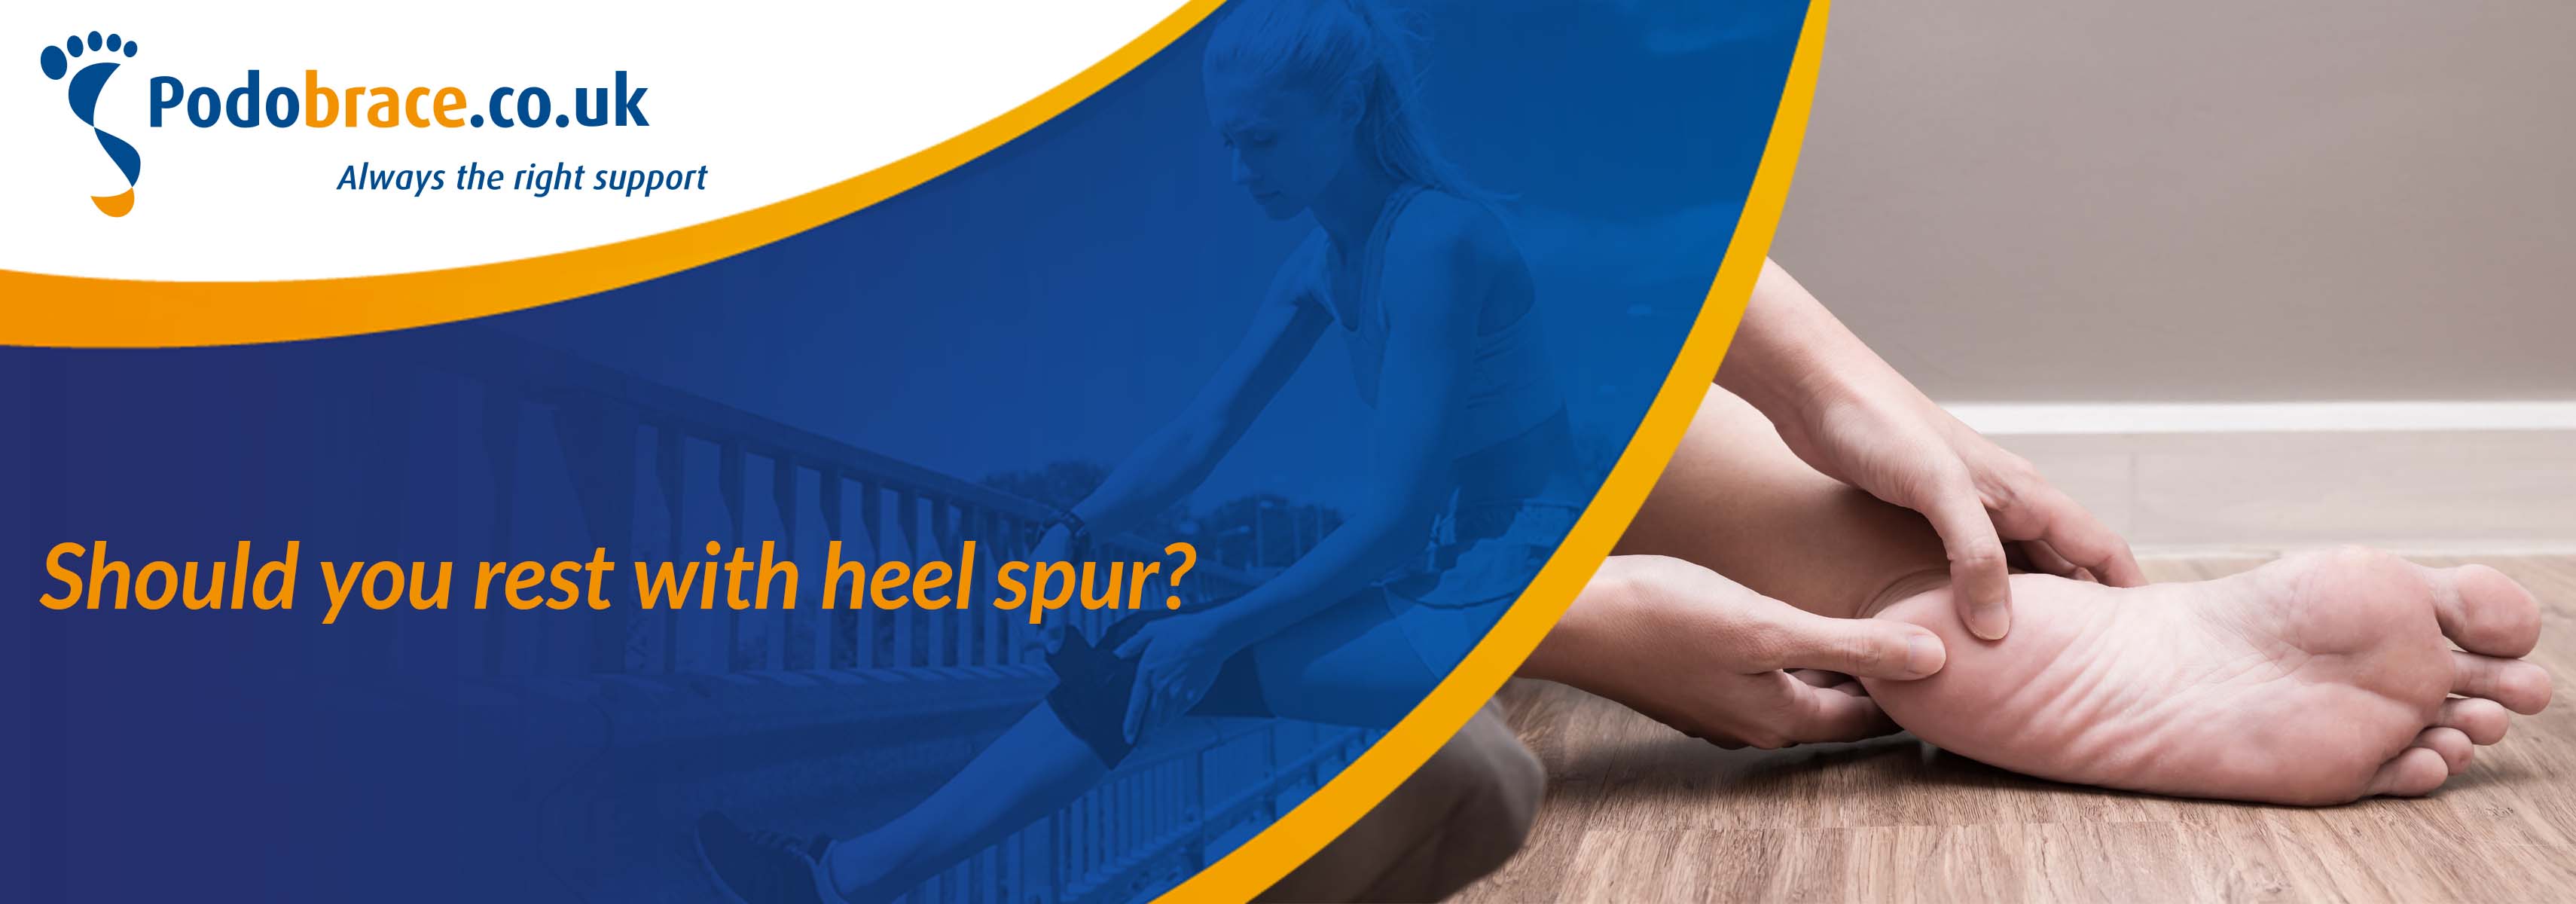 should you rest with heel spur